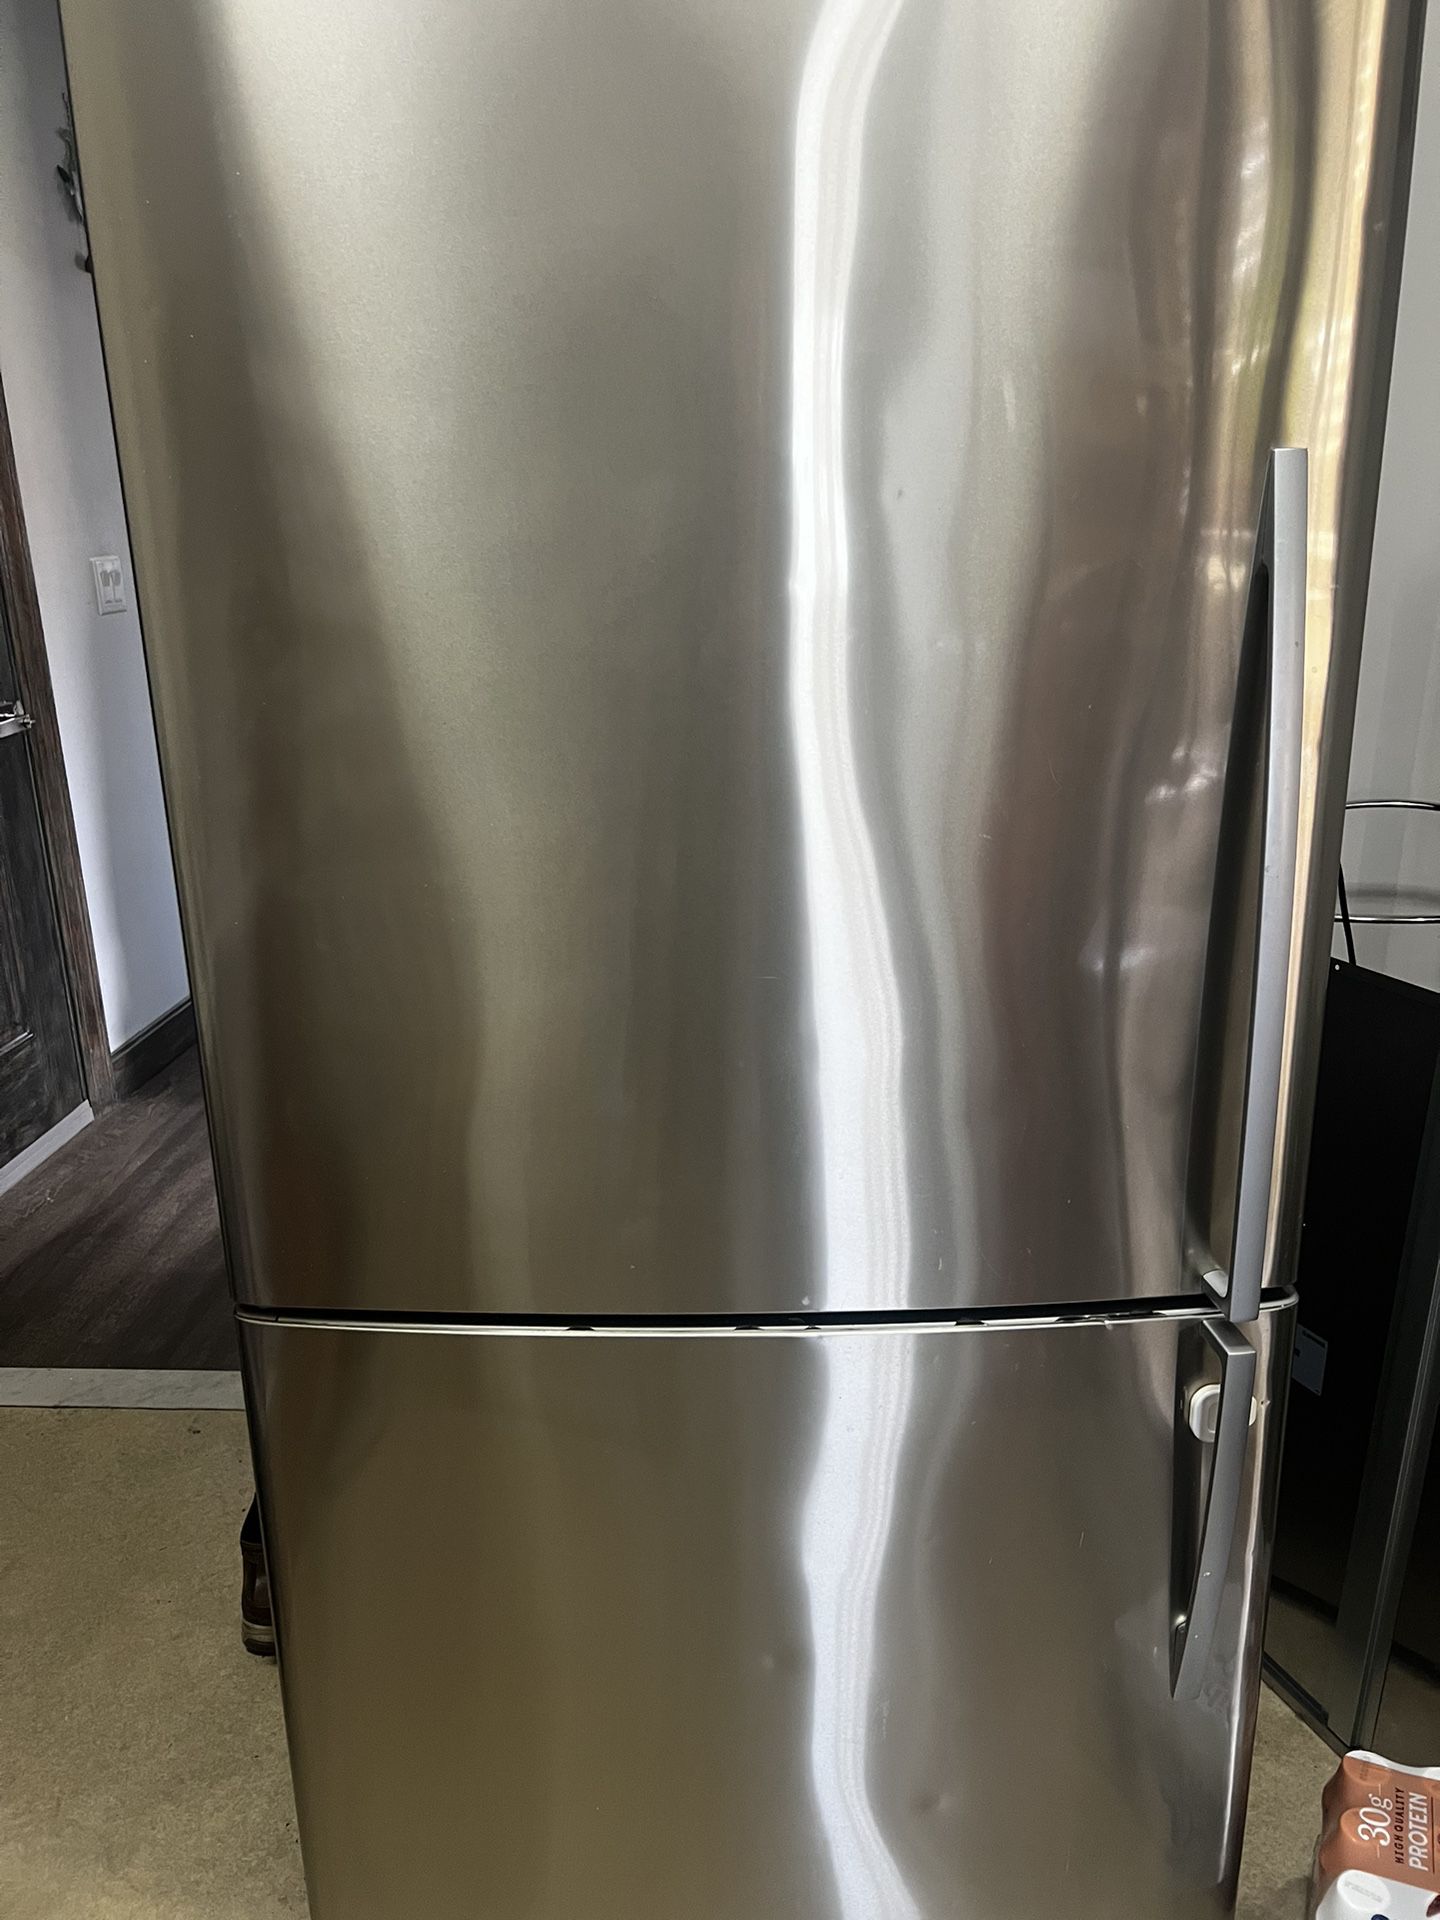 Stainless Steel Fridge- Well Maintained and Still Working 